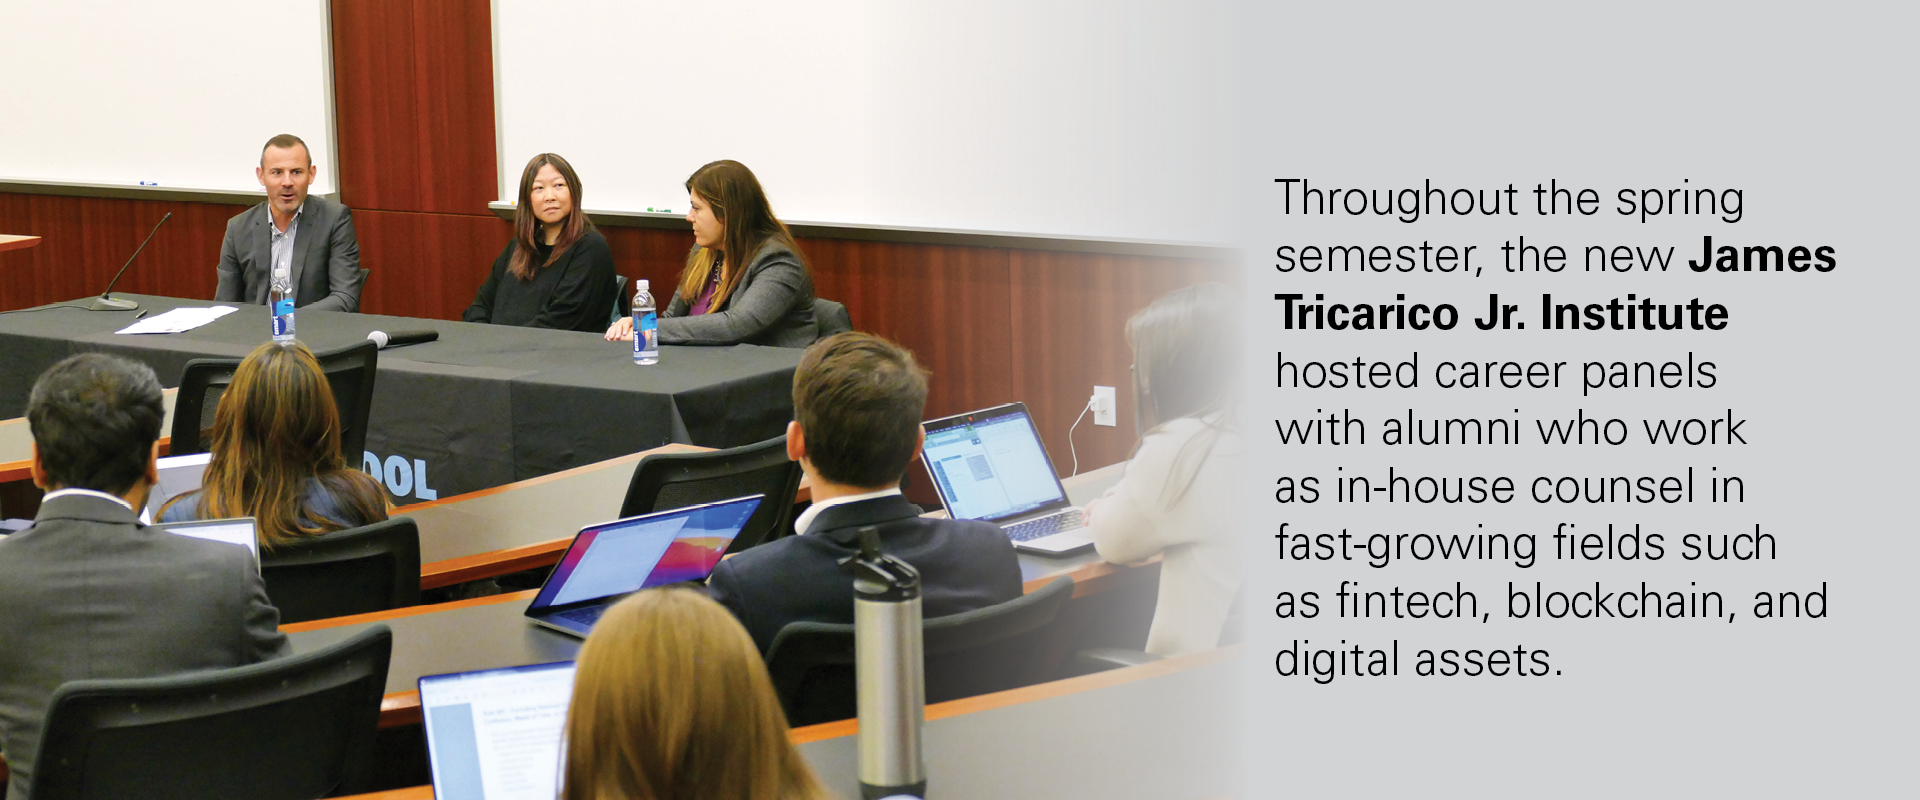 Throughout the spring semester, the new James Tricarico Jr. Institute hosted career panels with alumni who work as in-house counsel in fast-growing fields such as fintech, blockchain, and digital assets.